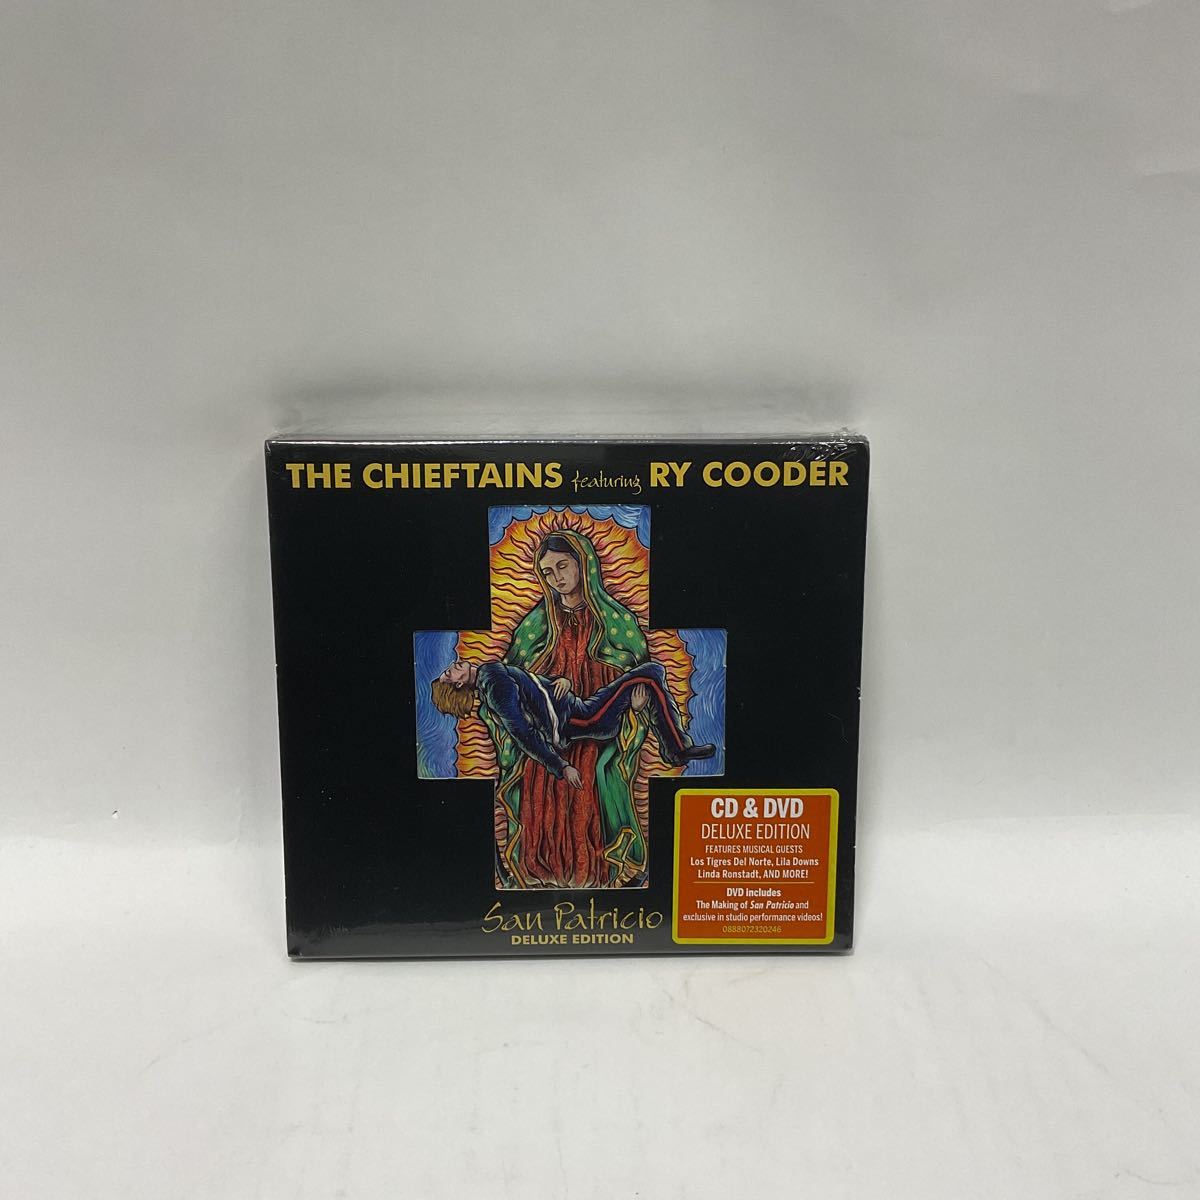 CHIEFTANS FEATURING RY COODER CHIEFTANS FEATURING RY COODER SAN PATRICIO (CD+DVDデラックスエディション限定盤) 未開封品_画像1